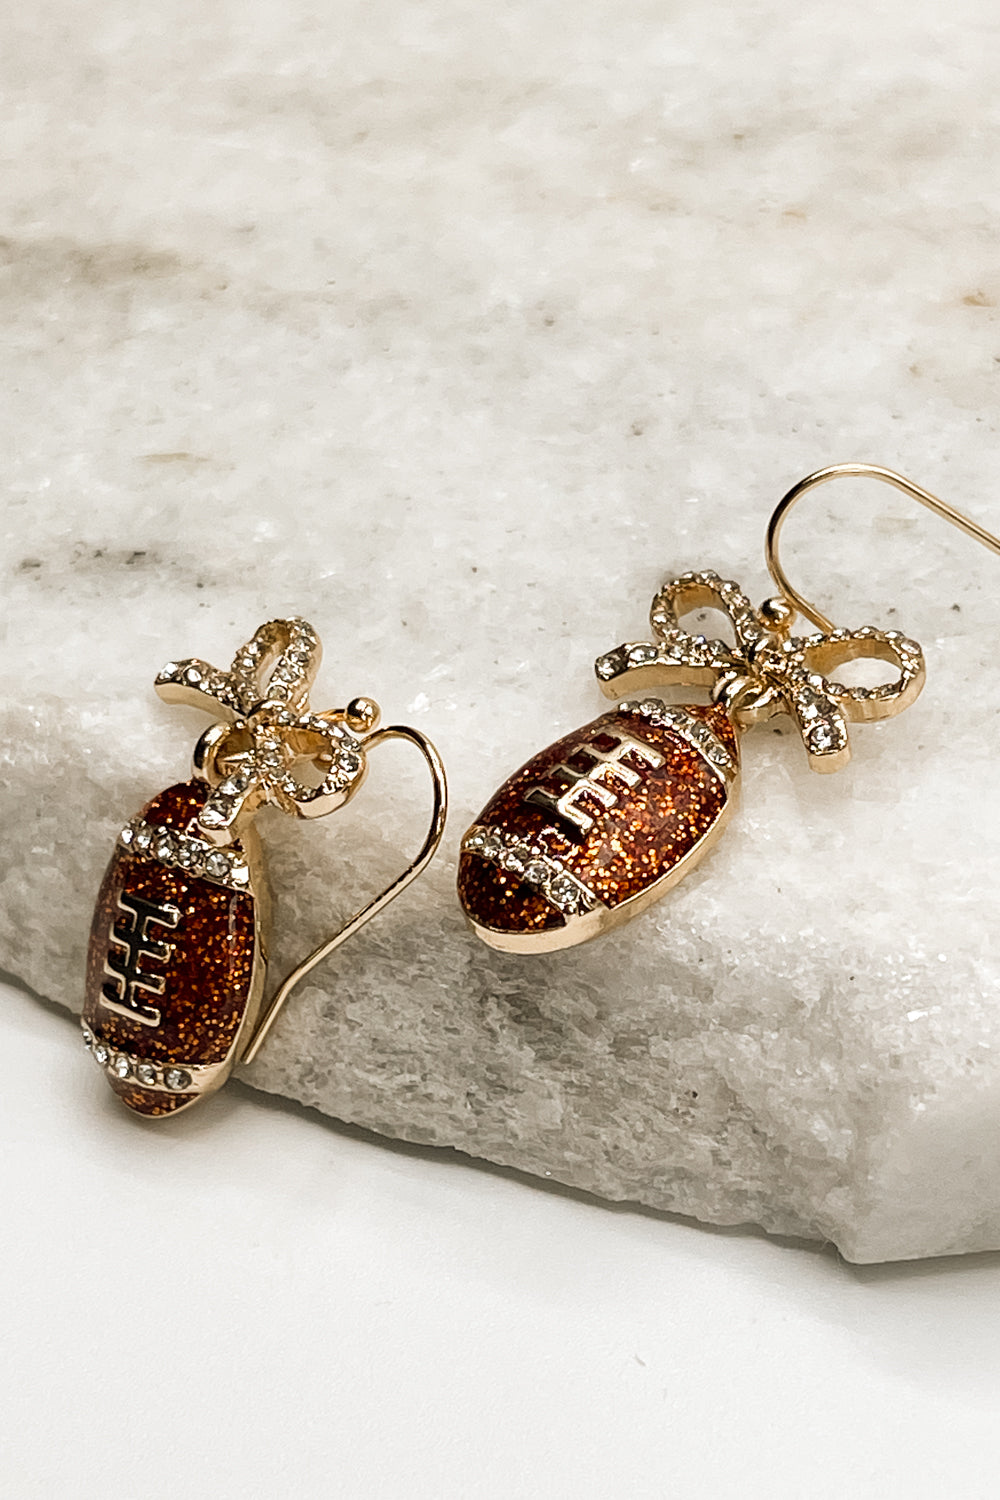  Close up of Callie Brown Rhinestone Football Earrings that are dangle earrings with rhinestone bows and footballs.